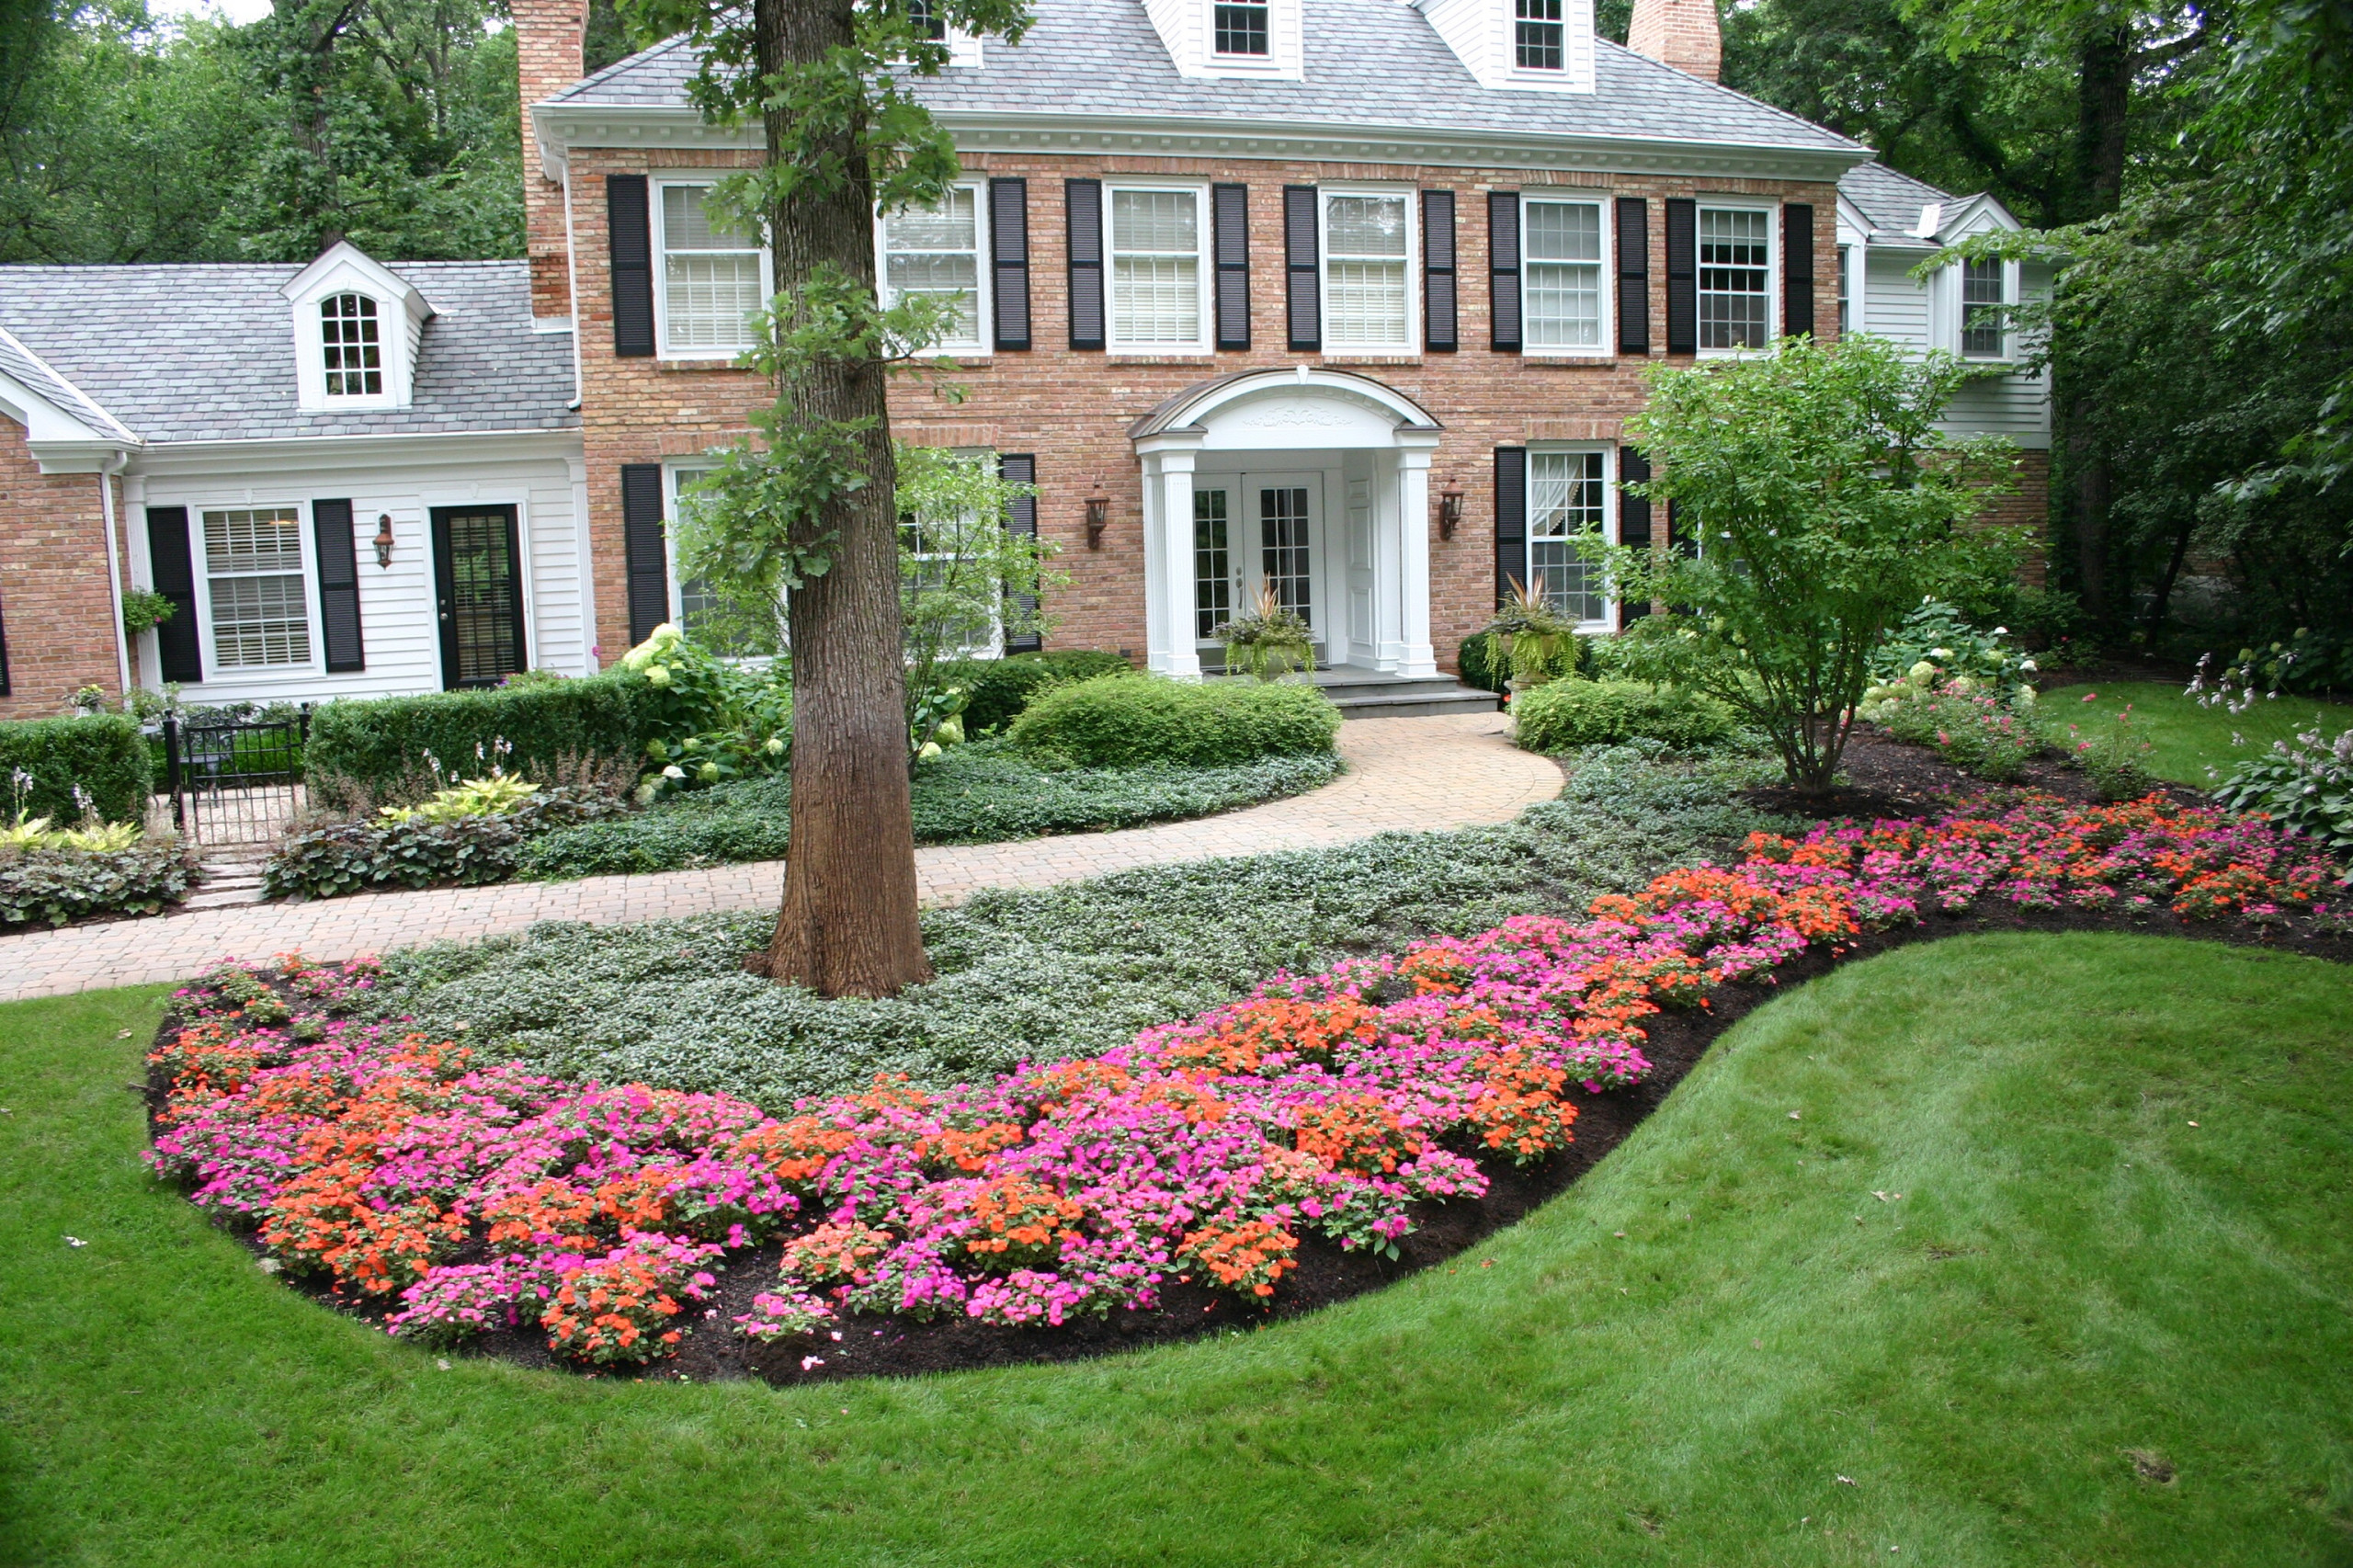 Here we used pots at the front door, pachysandra as a ground cover and a large bed of orange and hot pink new impatient to capture this welcome to this brick home. Peter Atkins and Associates